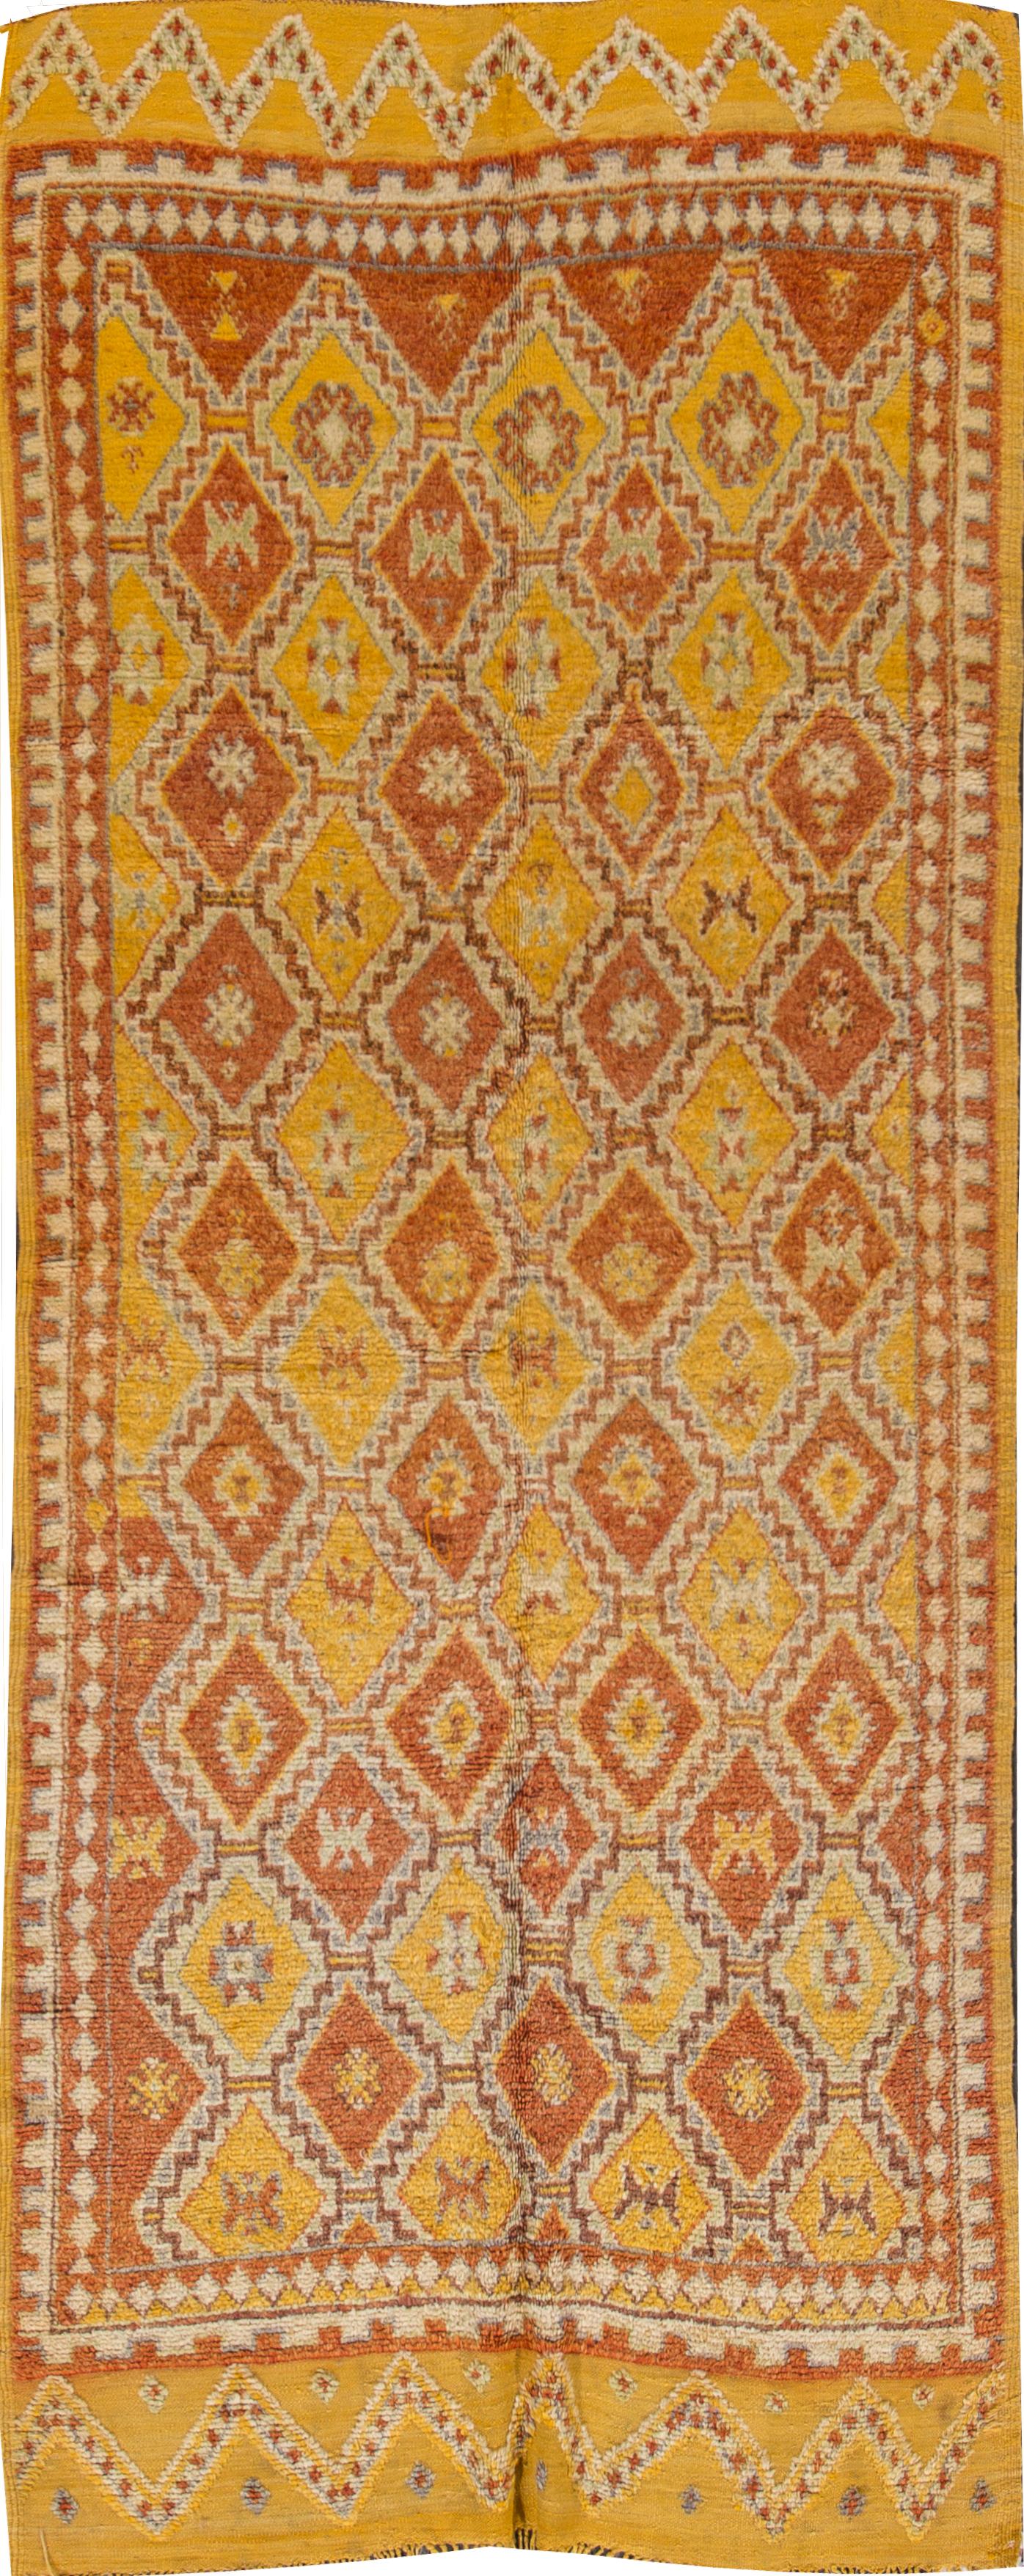 Beautiful Vintage Moroccan Rug, hand-knotted wool with a bright yellow field, orange accents in an allover tribal design.

This rug measures 4' 3